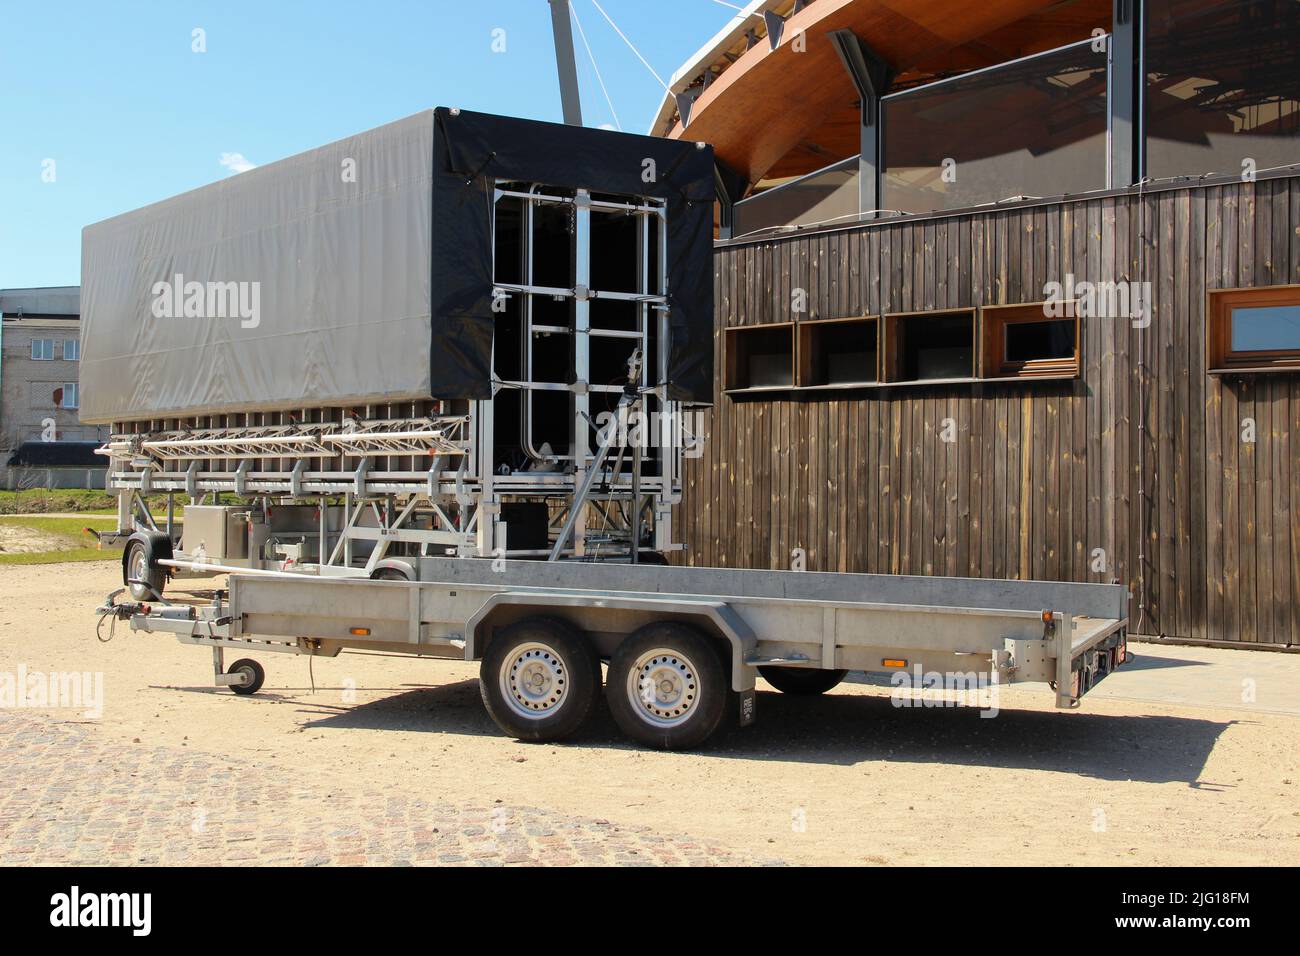 Open and roofed car trailers for commercial usage. Transportation utility for rent. Stock Photo